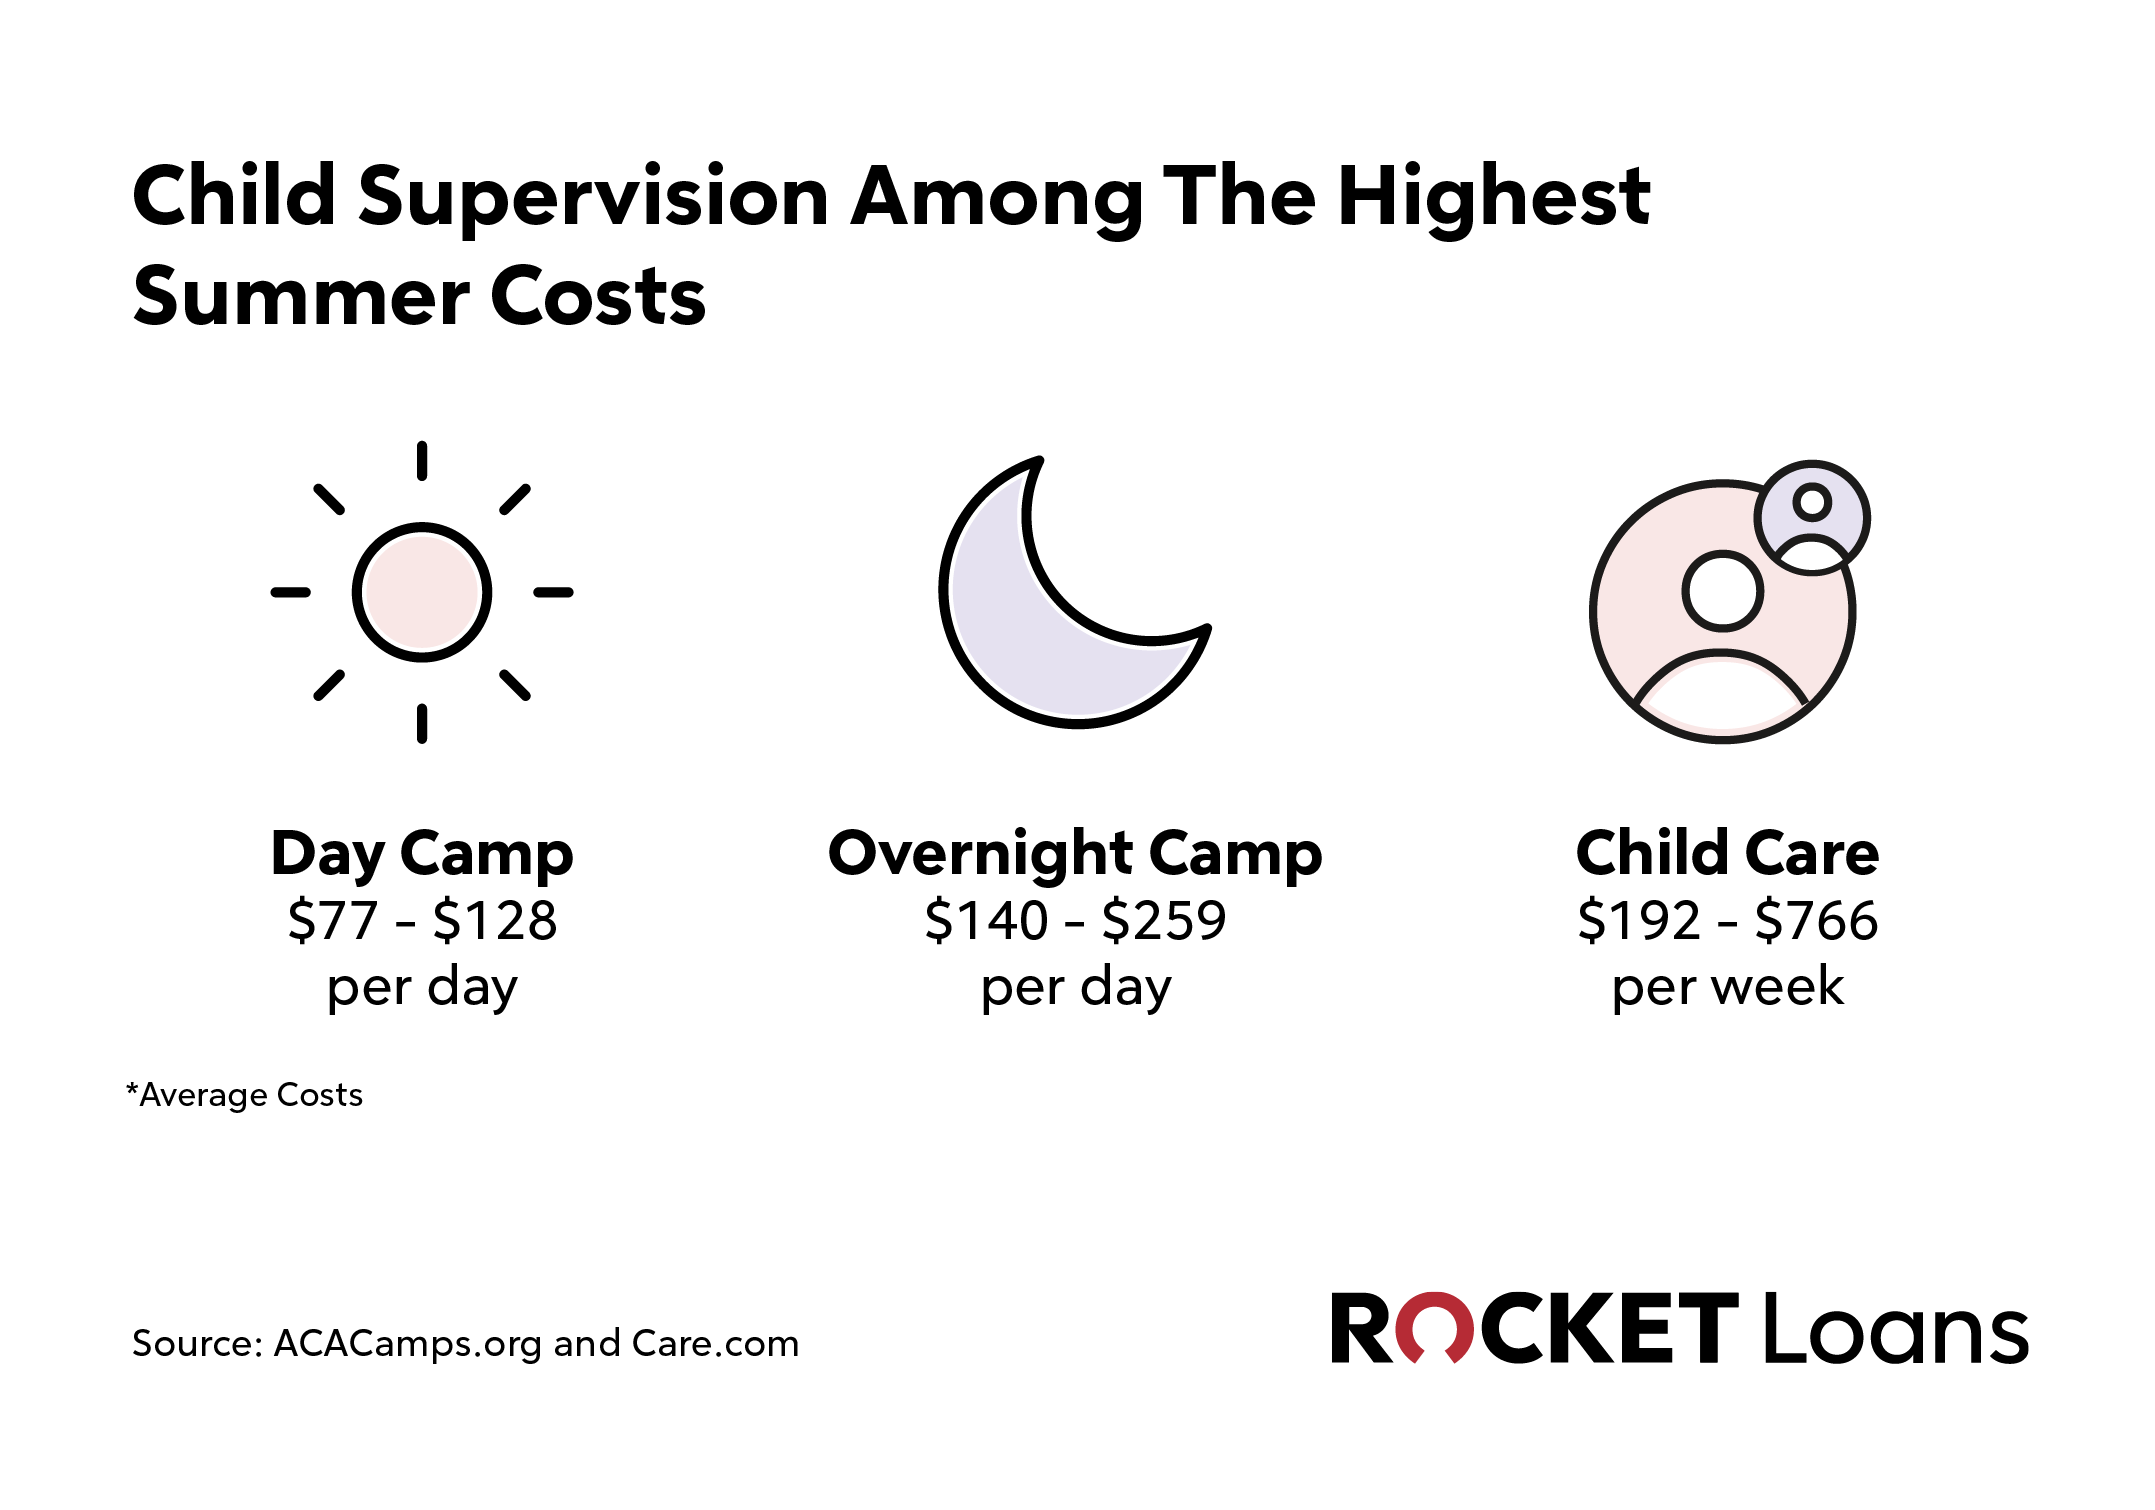 Infographic for "Child Supervision Among the Highest Summer Costs".